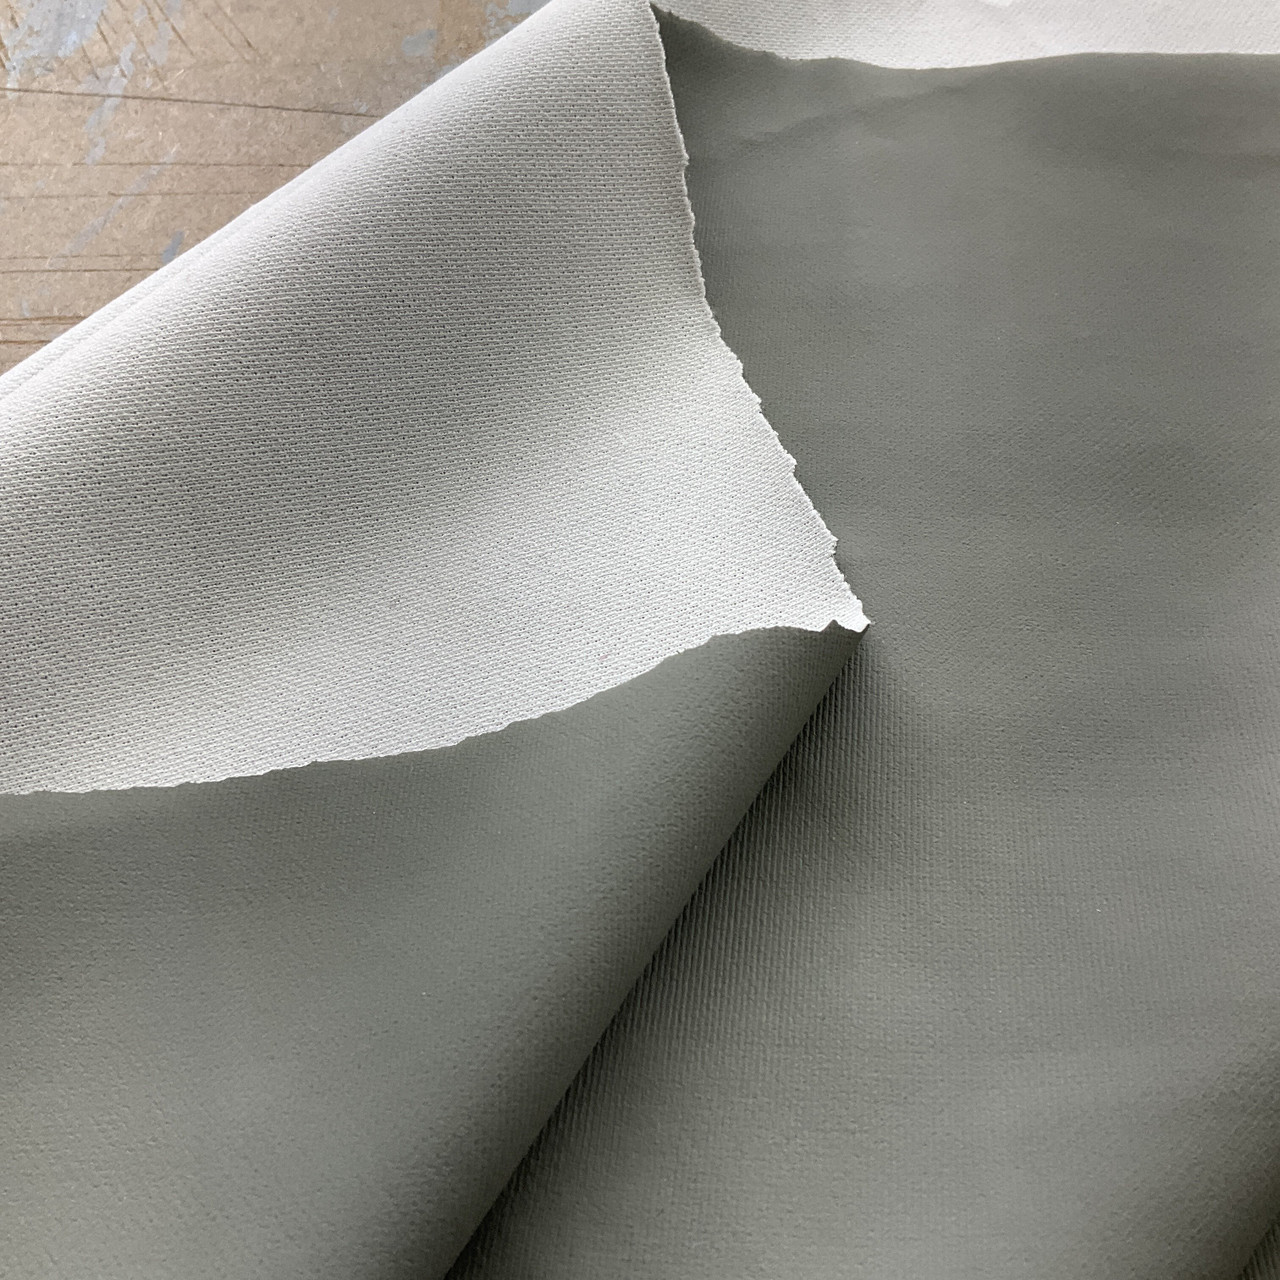 Vinyl Upholstery Fabric By The Yard - Sewing Projects